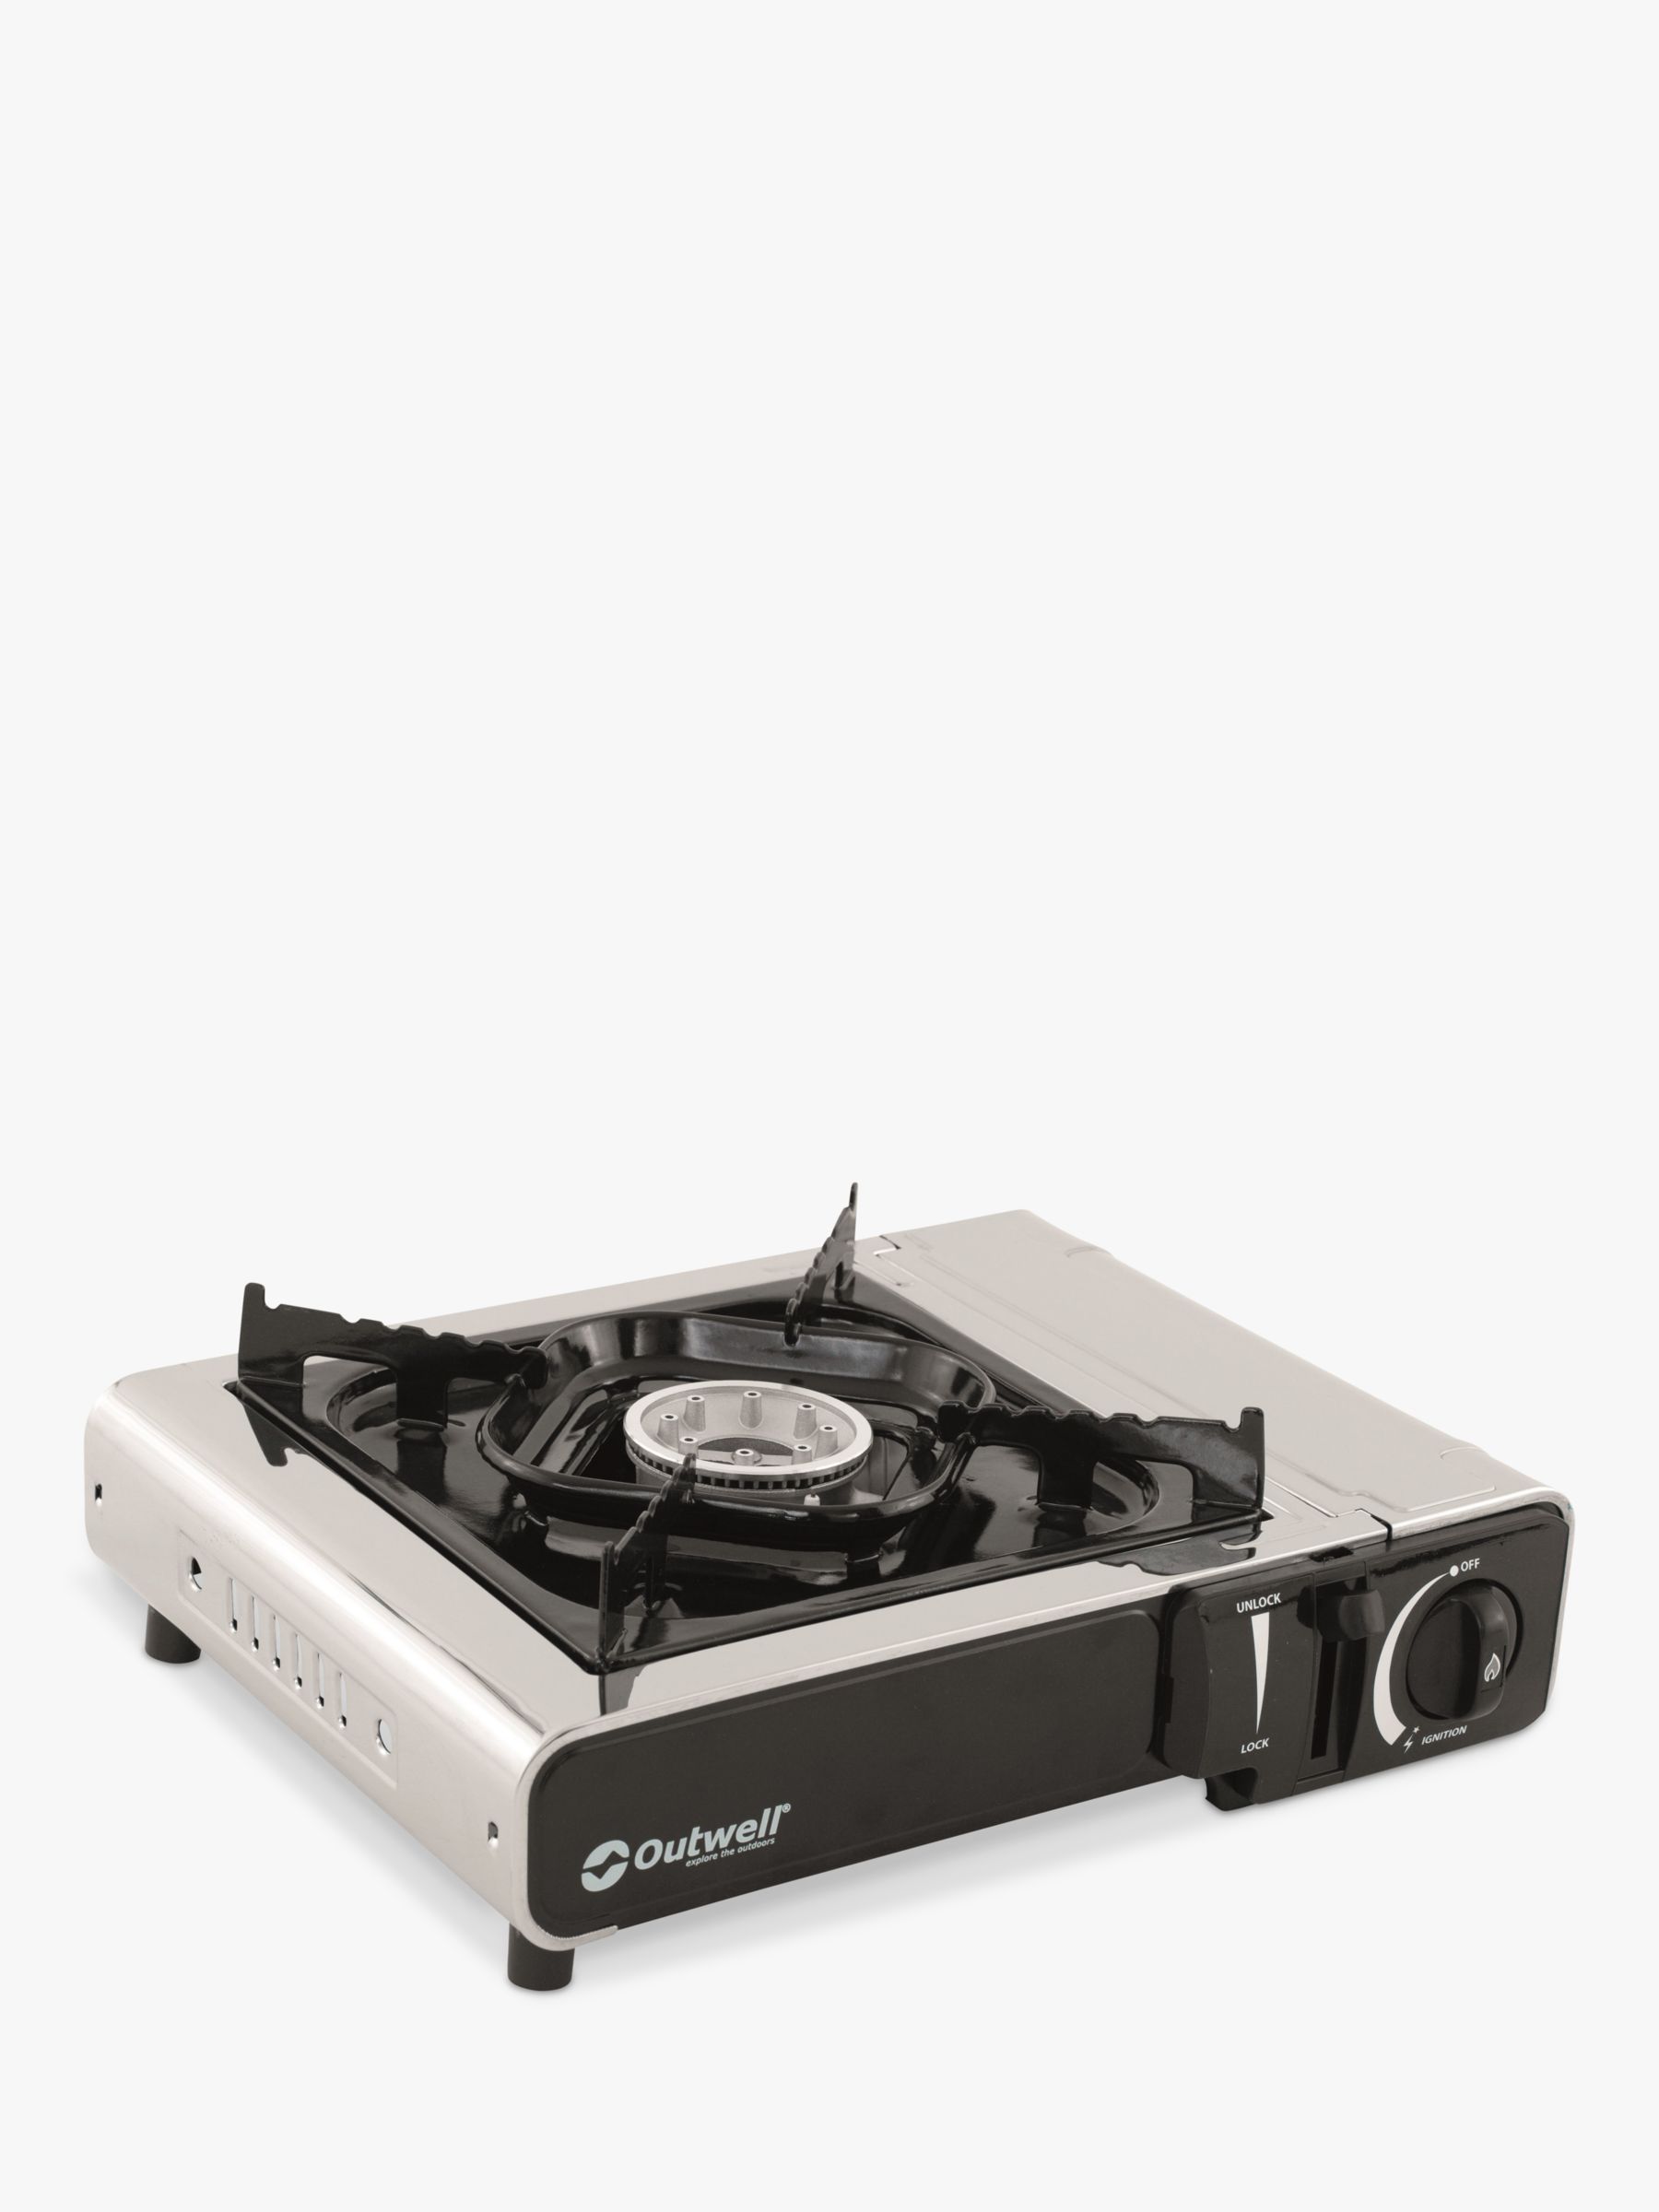 Outwell 1 burner gas stove